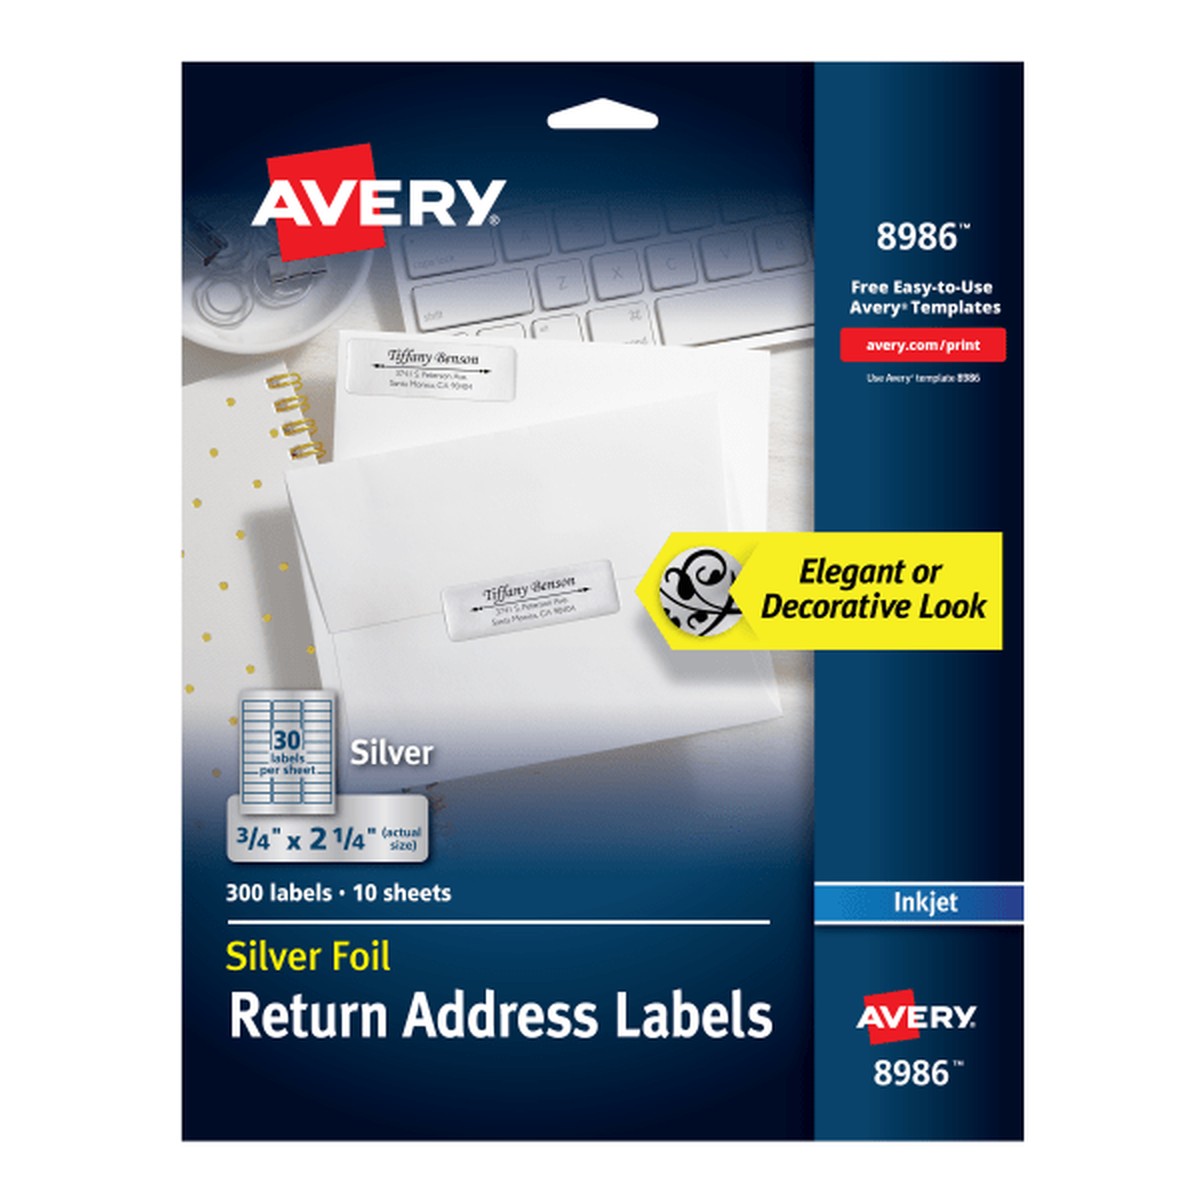 Avery Gold Foil Mailing Labels - 3/4" Width x 2 1/4" Length - Permanent Adhesive - Rectangle - Inkjet - Silver - Paper - 30